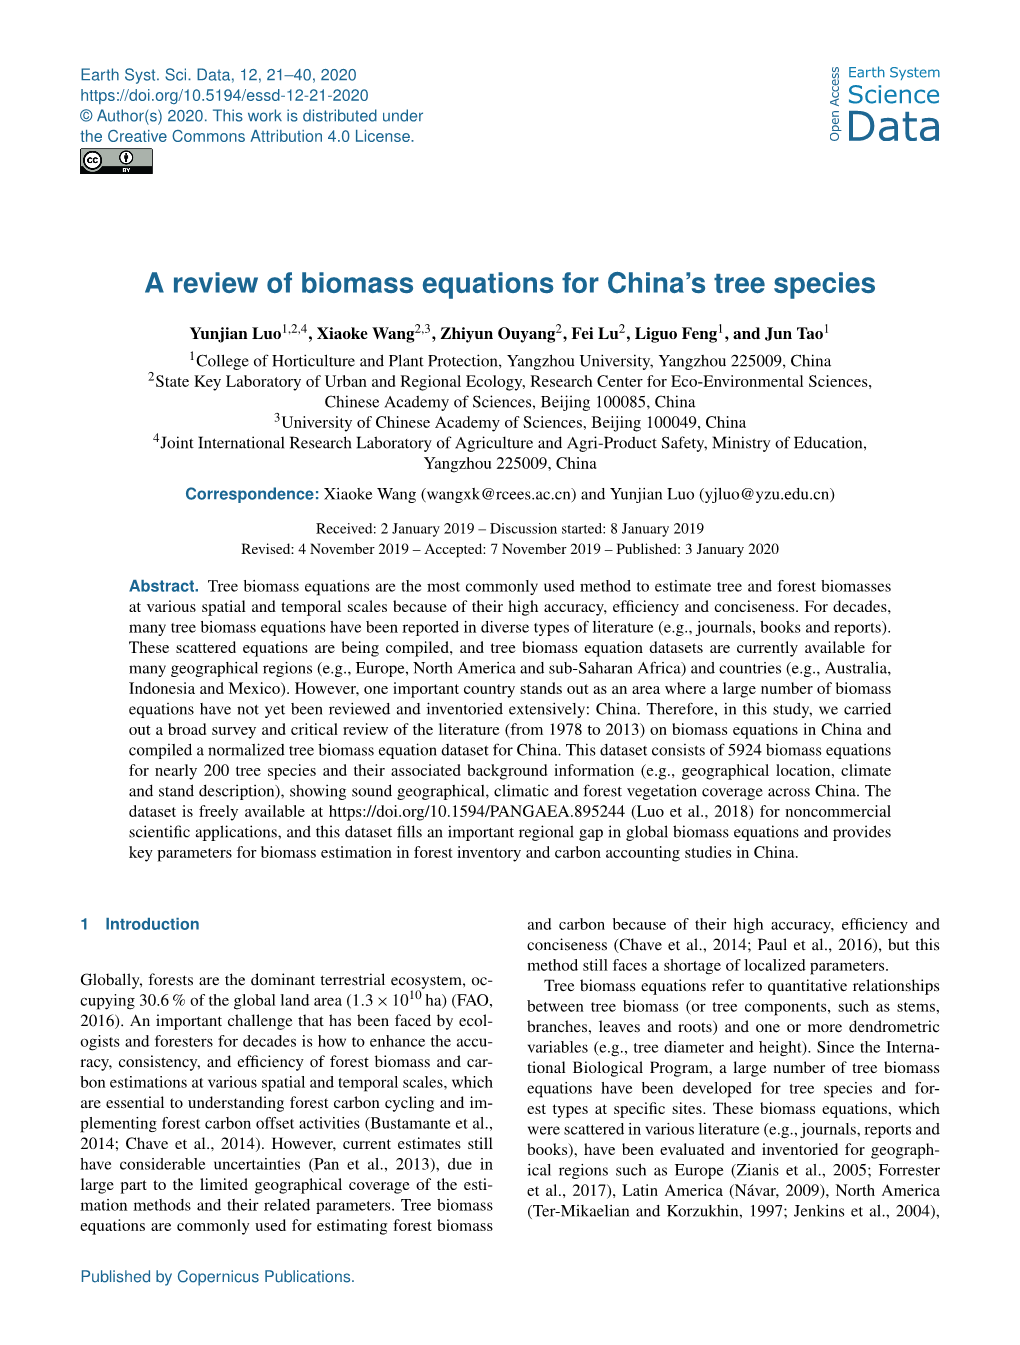 A Review of Biomass Equations for China's Tree Species